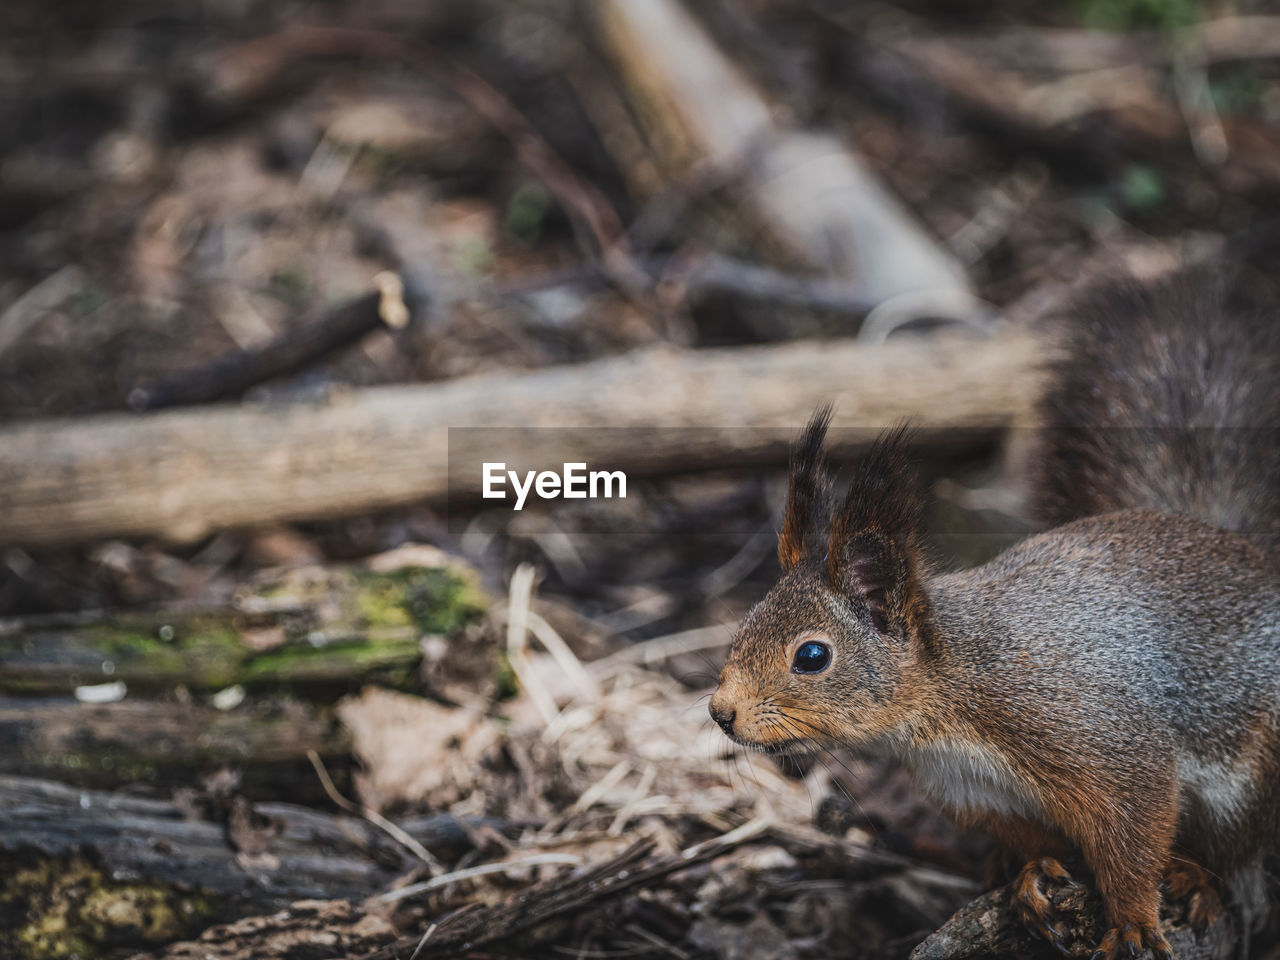 animal, animal themes, nature, animal wildlife, wildlife, one animal, mammal, squirrel, rodent, no people, land, eating, close-up, forest, tree, outdoors, chipmunk, focus on foreground, animal body part, plant, day, side view